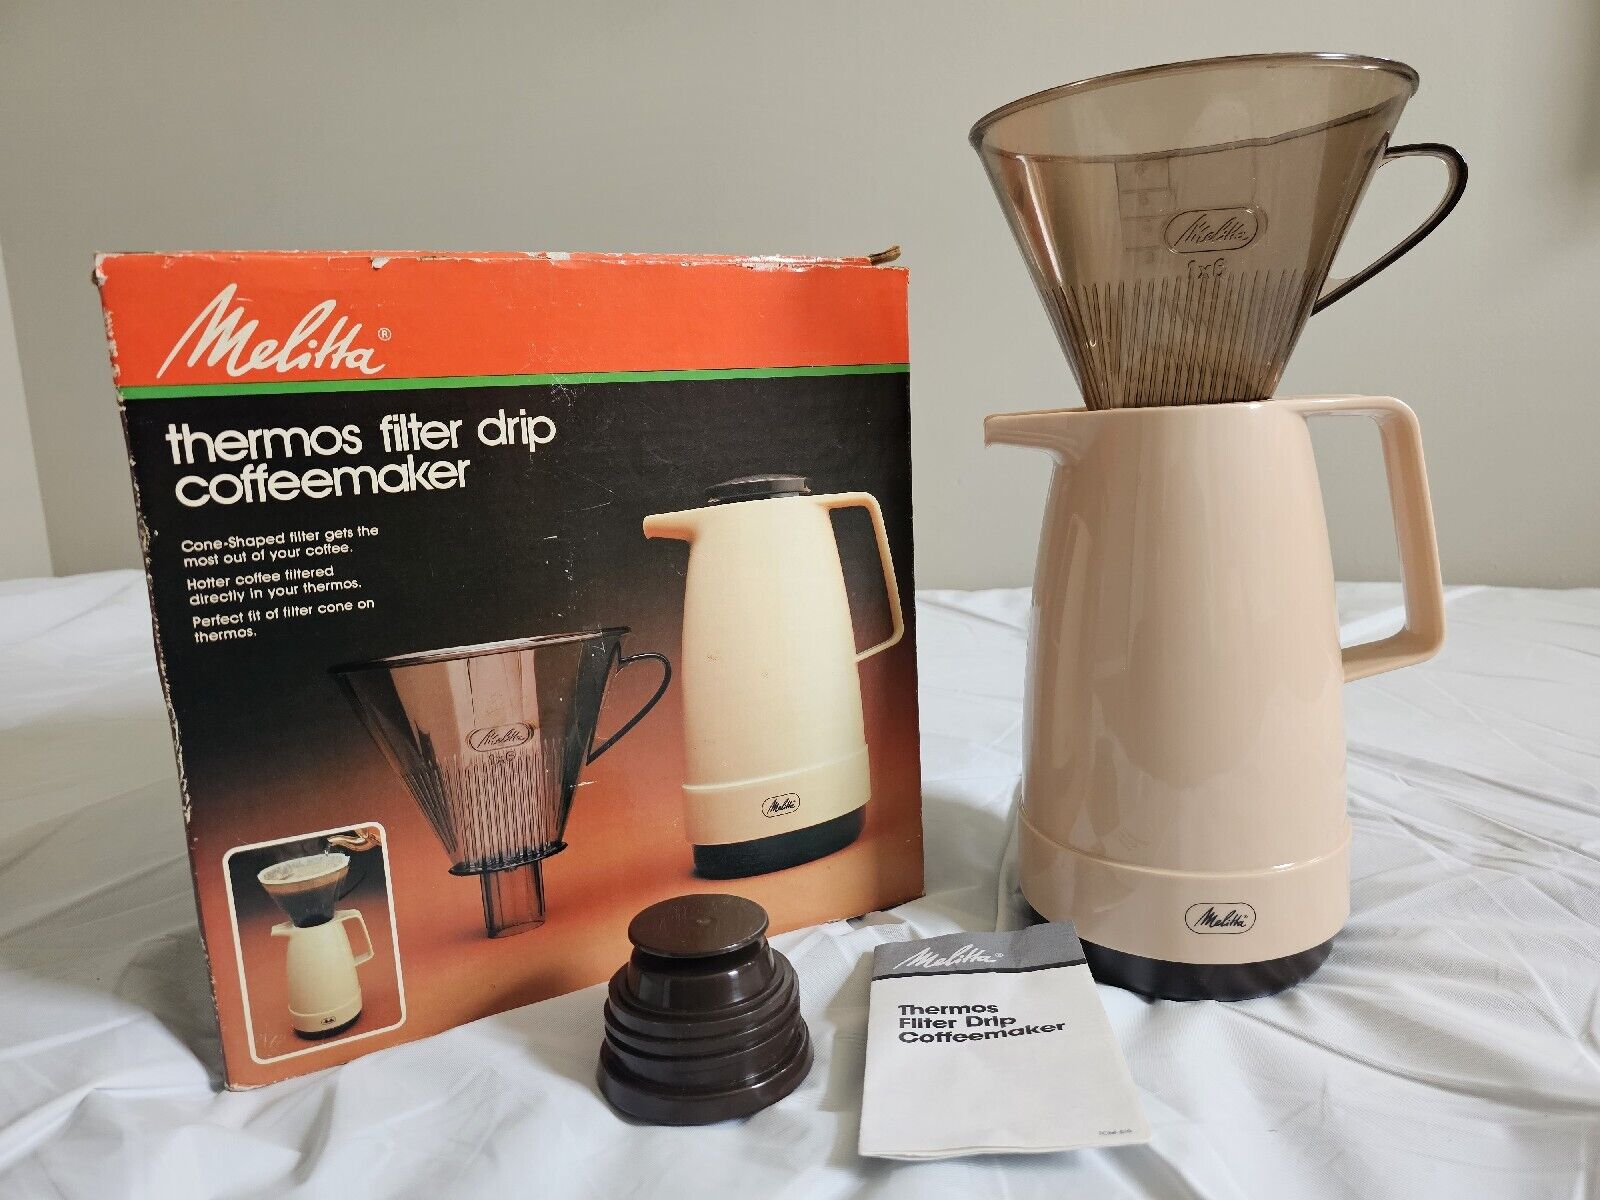 Vintage Discontinued 1983 Melitta 6 Cup Thermos Filter Drip Coffeemaker With Box